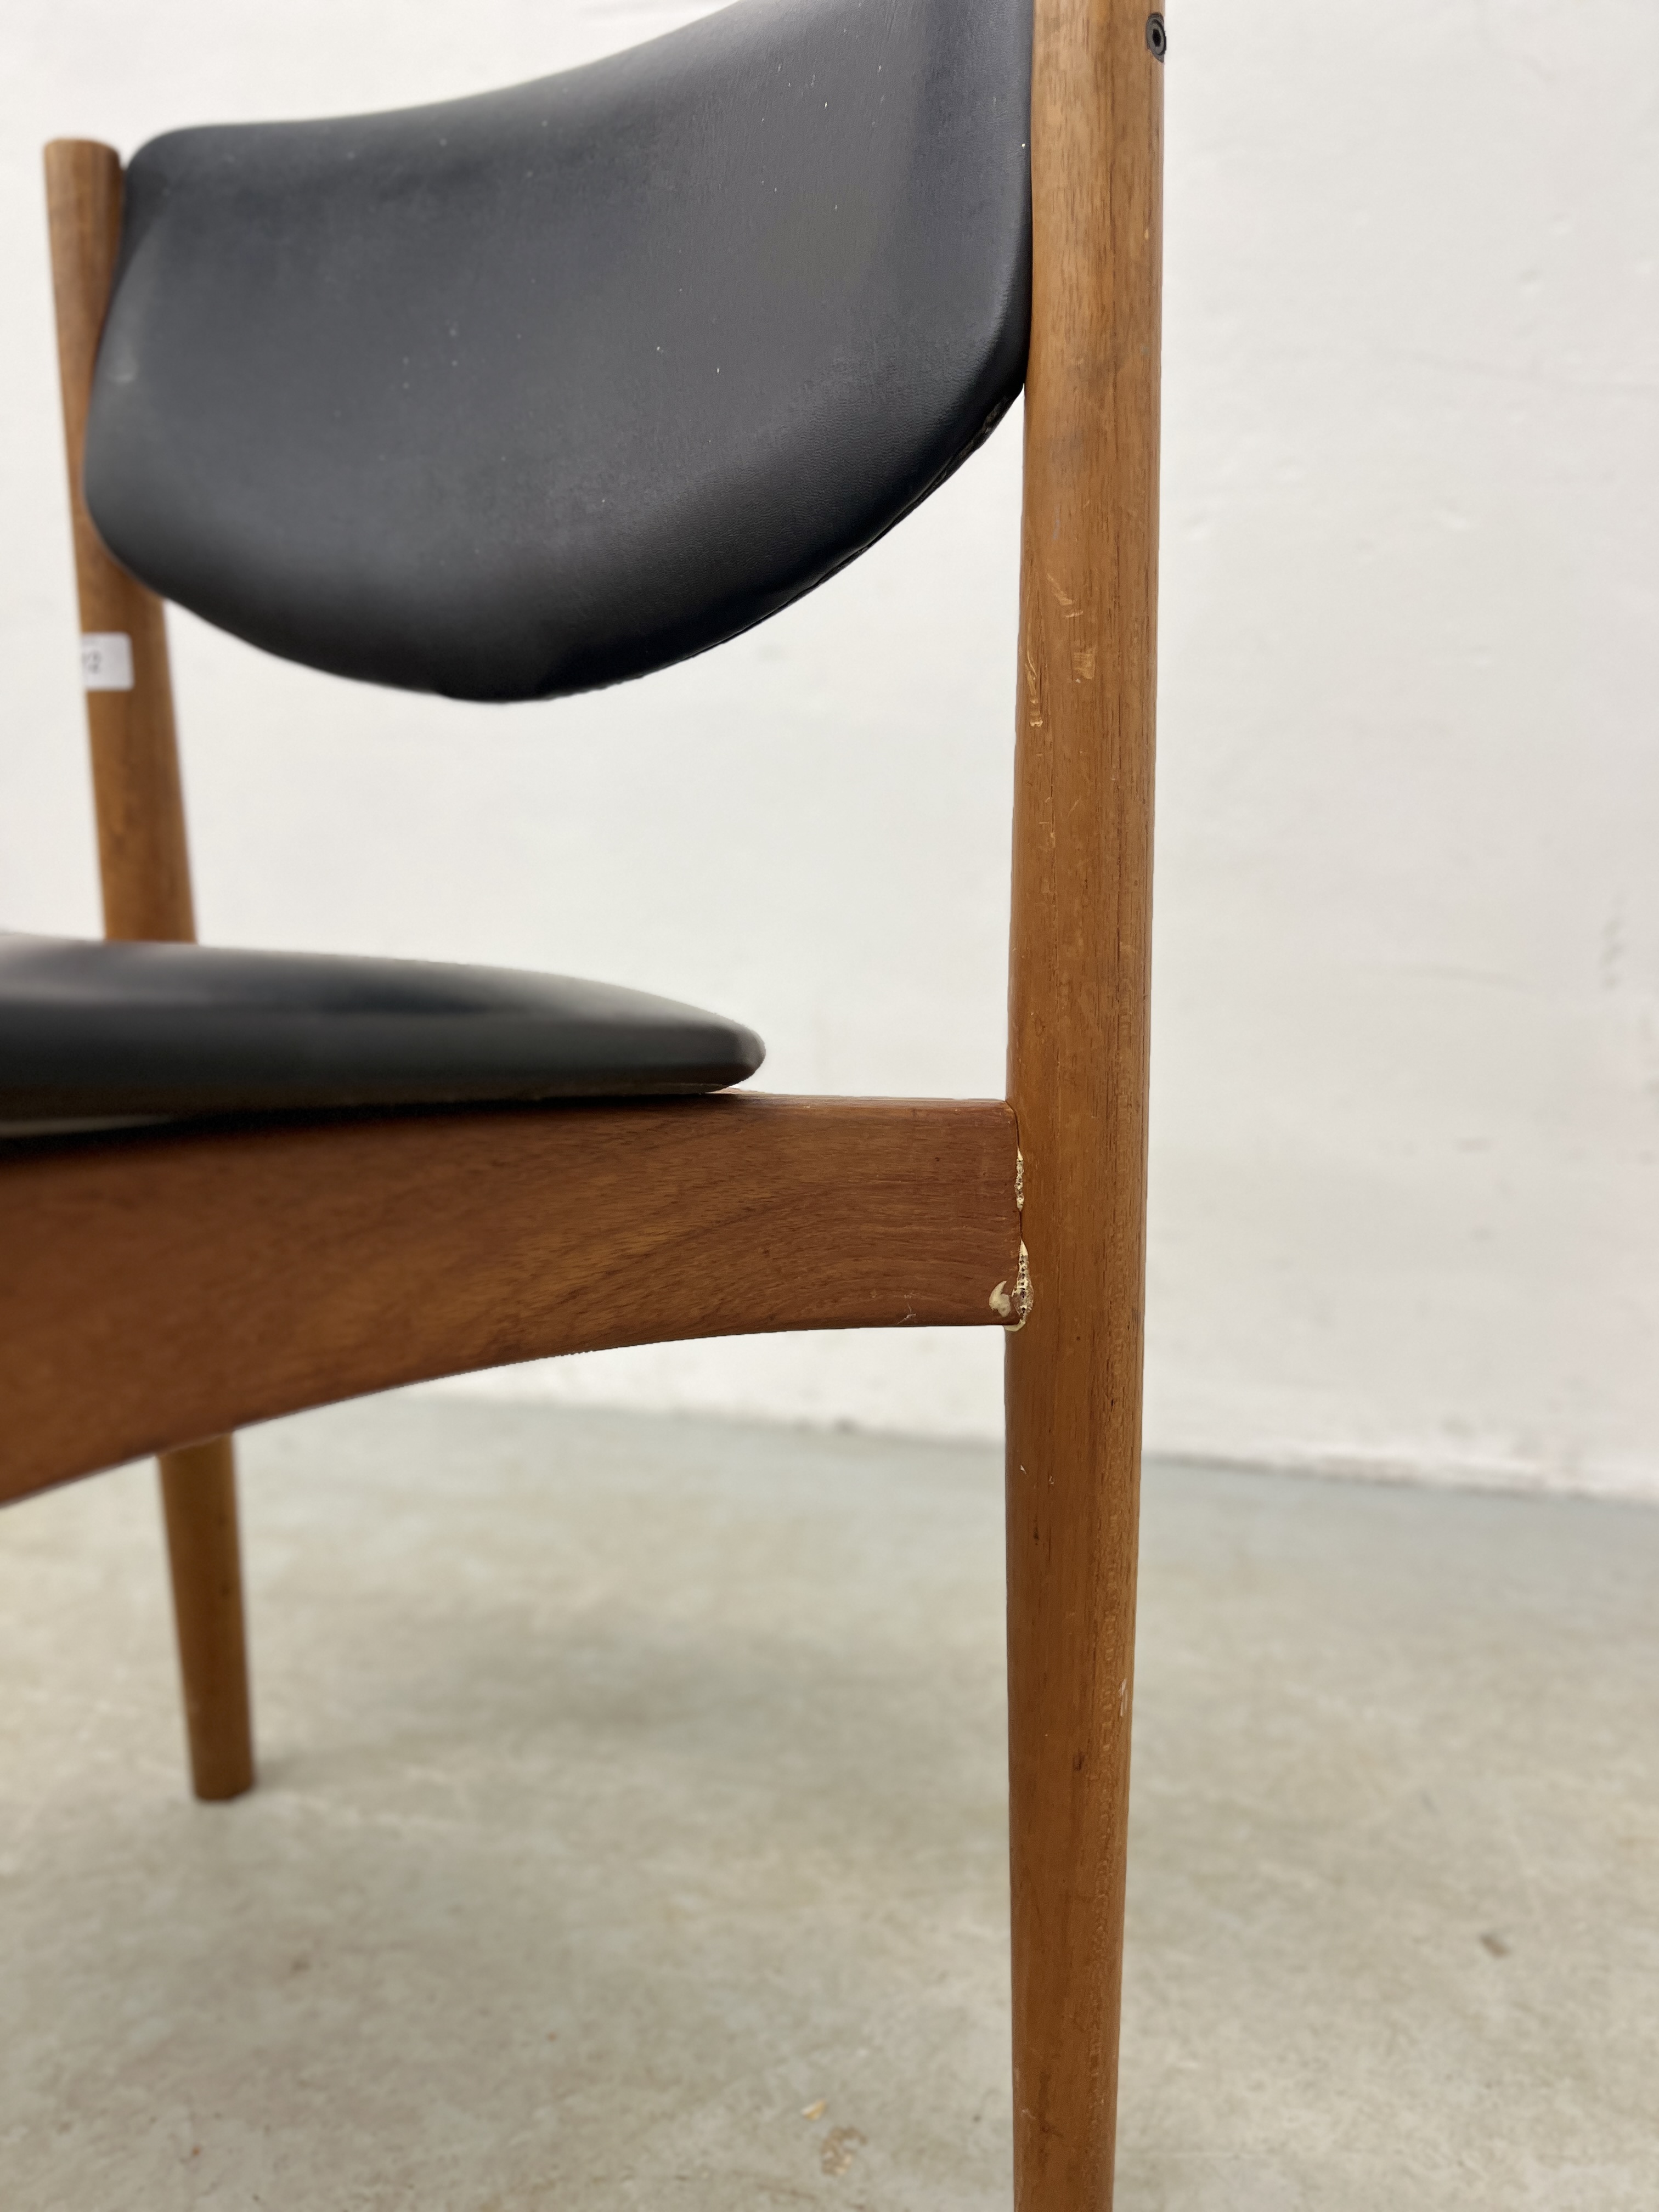 A MID CENTURY DANISH TEAK SIDE CHAIR BEARING LABEL FRANCE & SON. DESIGNED BY FIN JUHL A/F NO. - Image 3 of 10